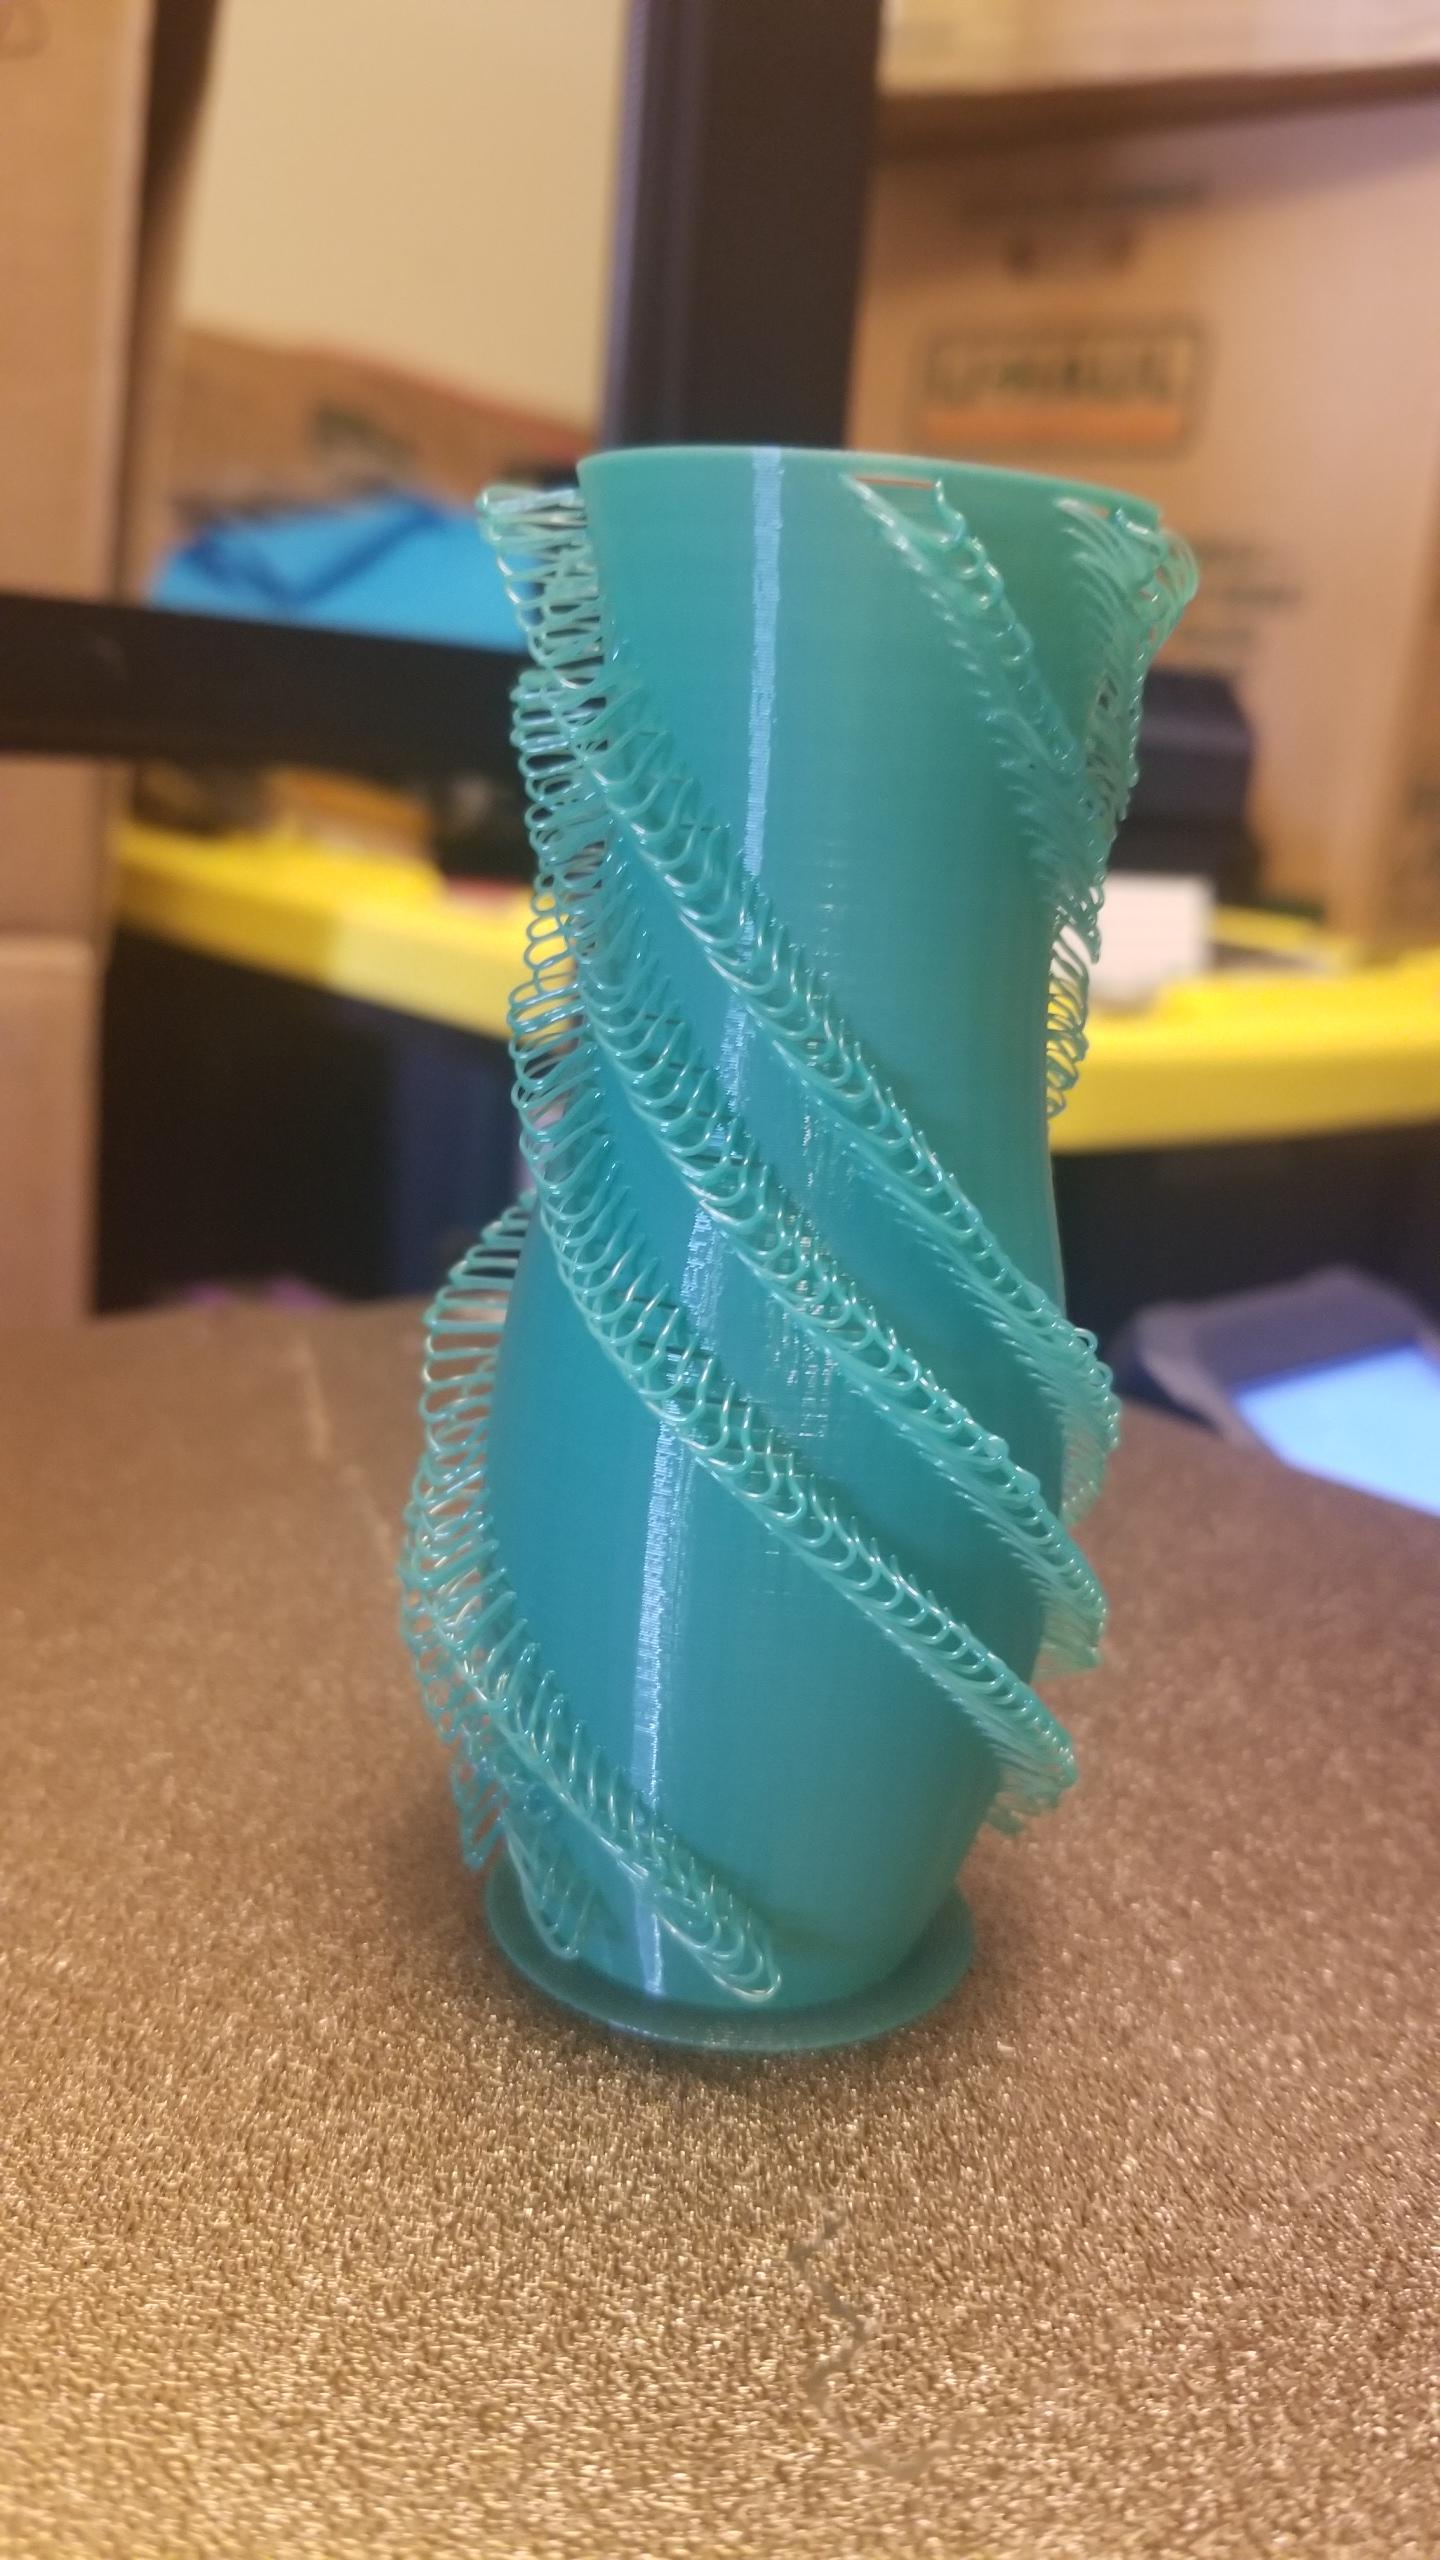 Triple twist vase - Thanks for the loopy vase, tried my first one, came out ok, small only 100mm tall. - 3d model